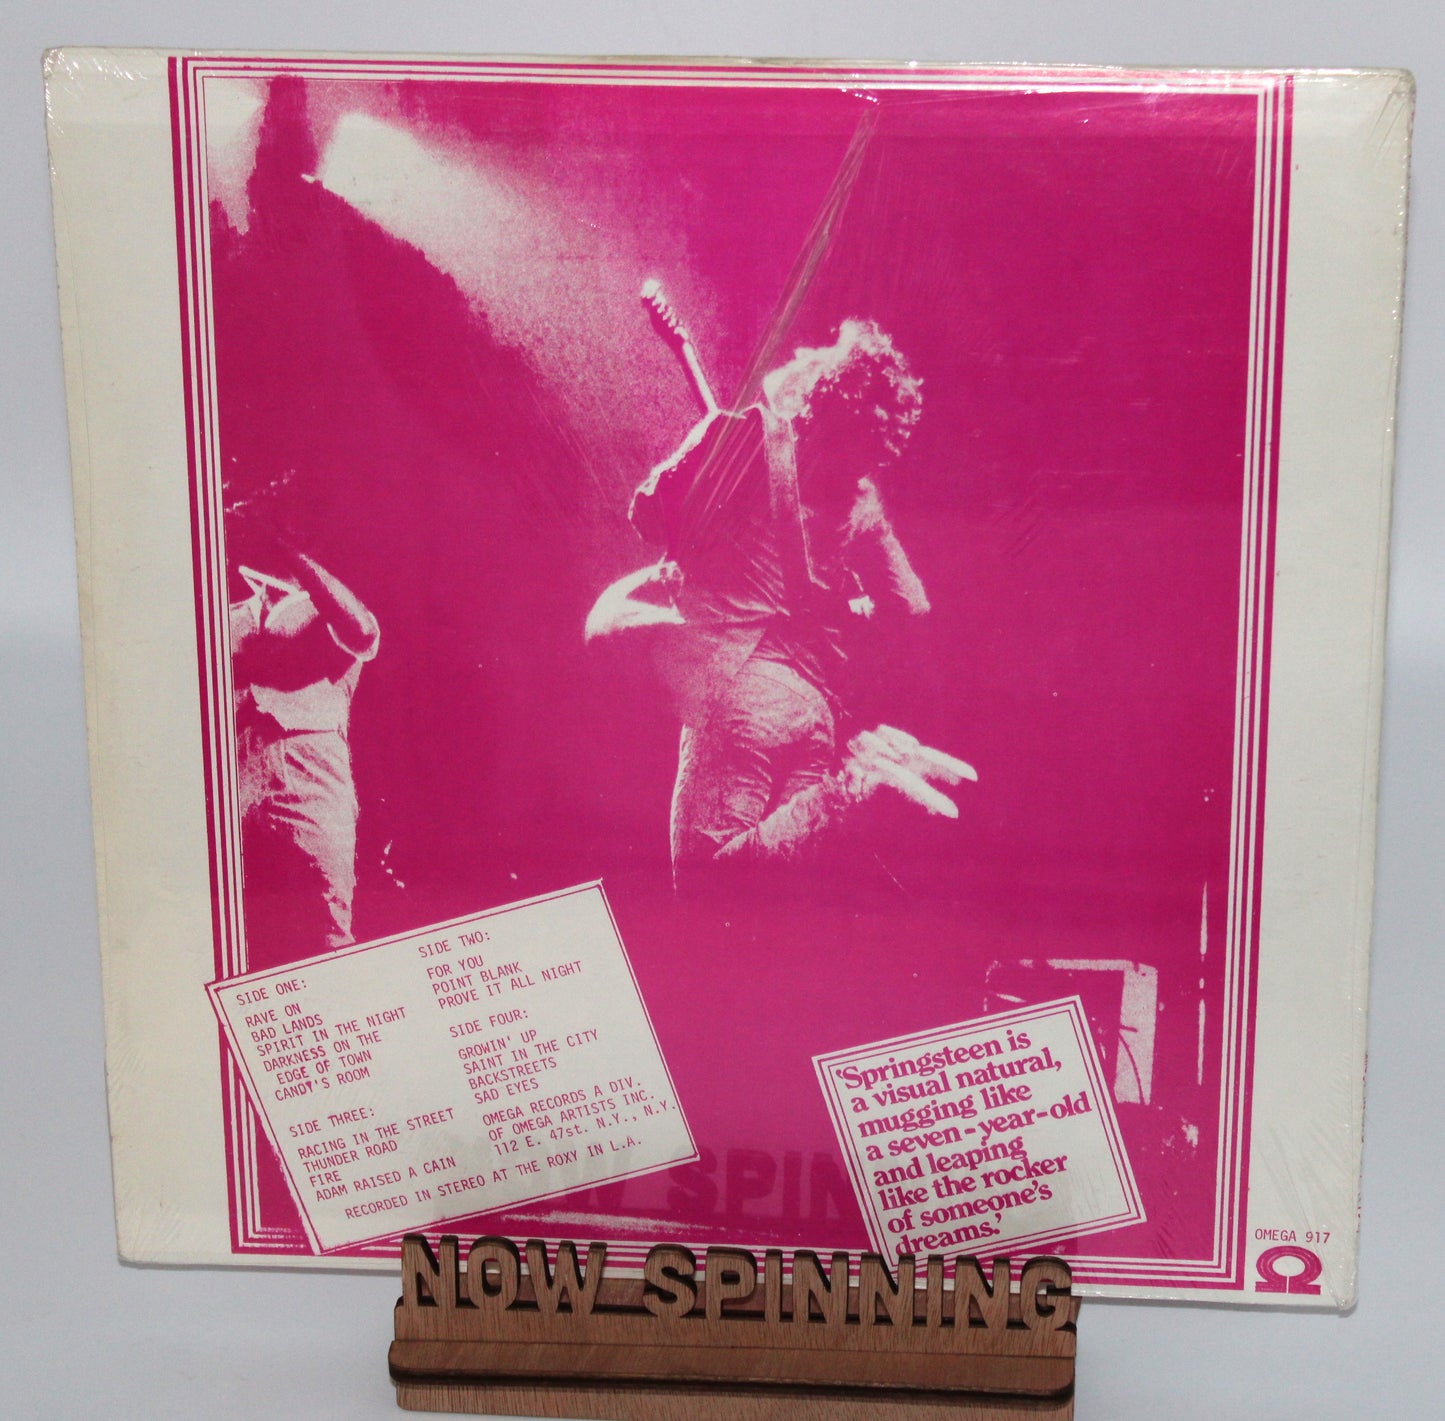 Bruce Springsteen - SEALED - Raises Cain - Live in Stereo at the Roxy in L.A. July 7, 1978 BLV